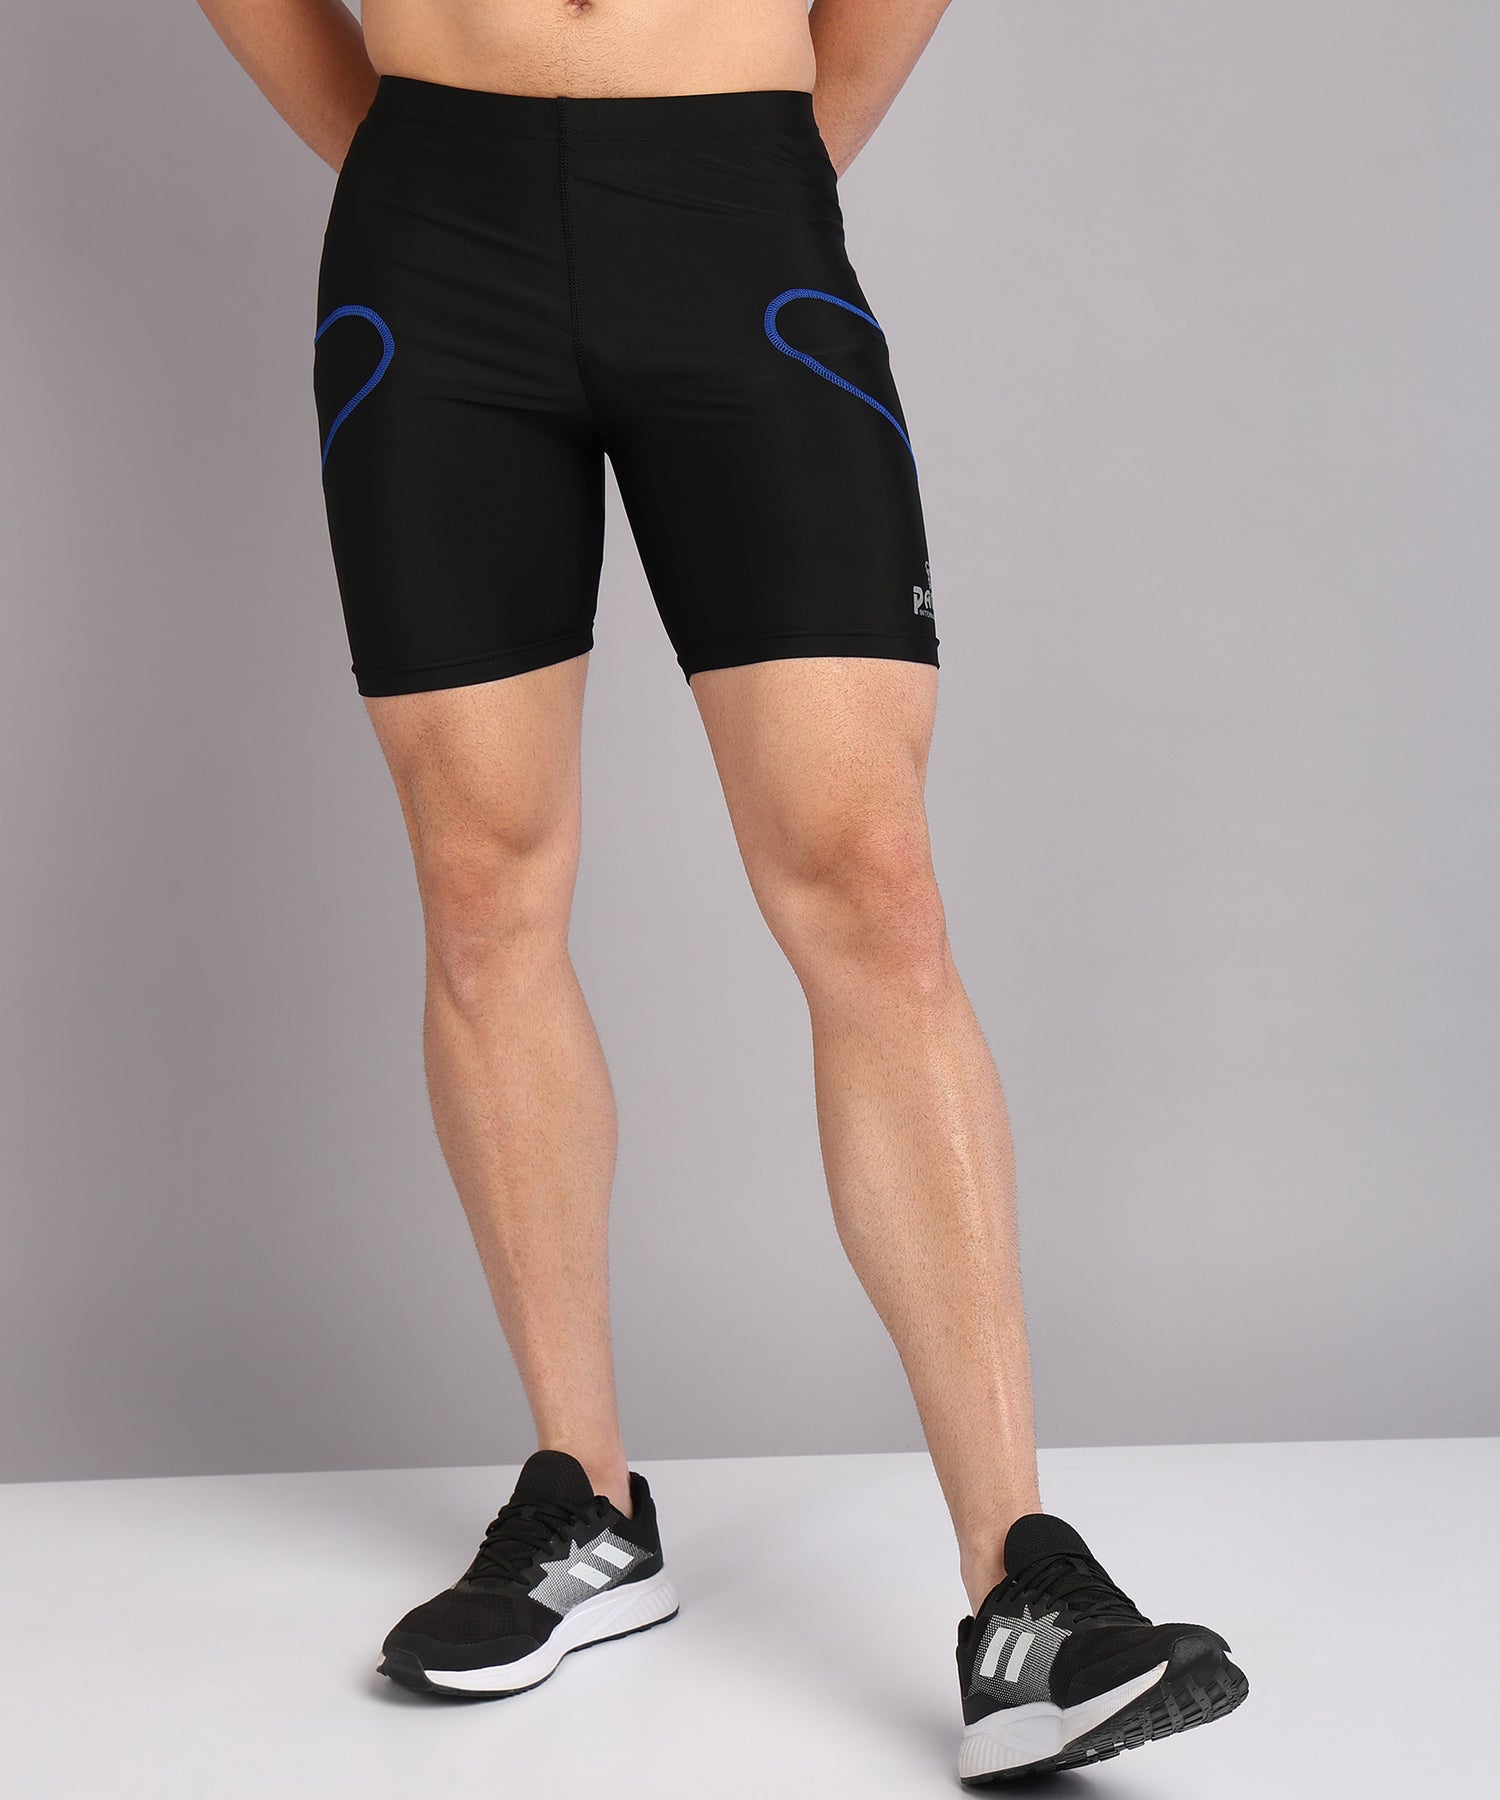 Pace International Compression Tights for Men